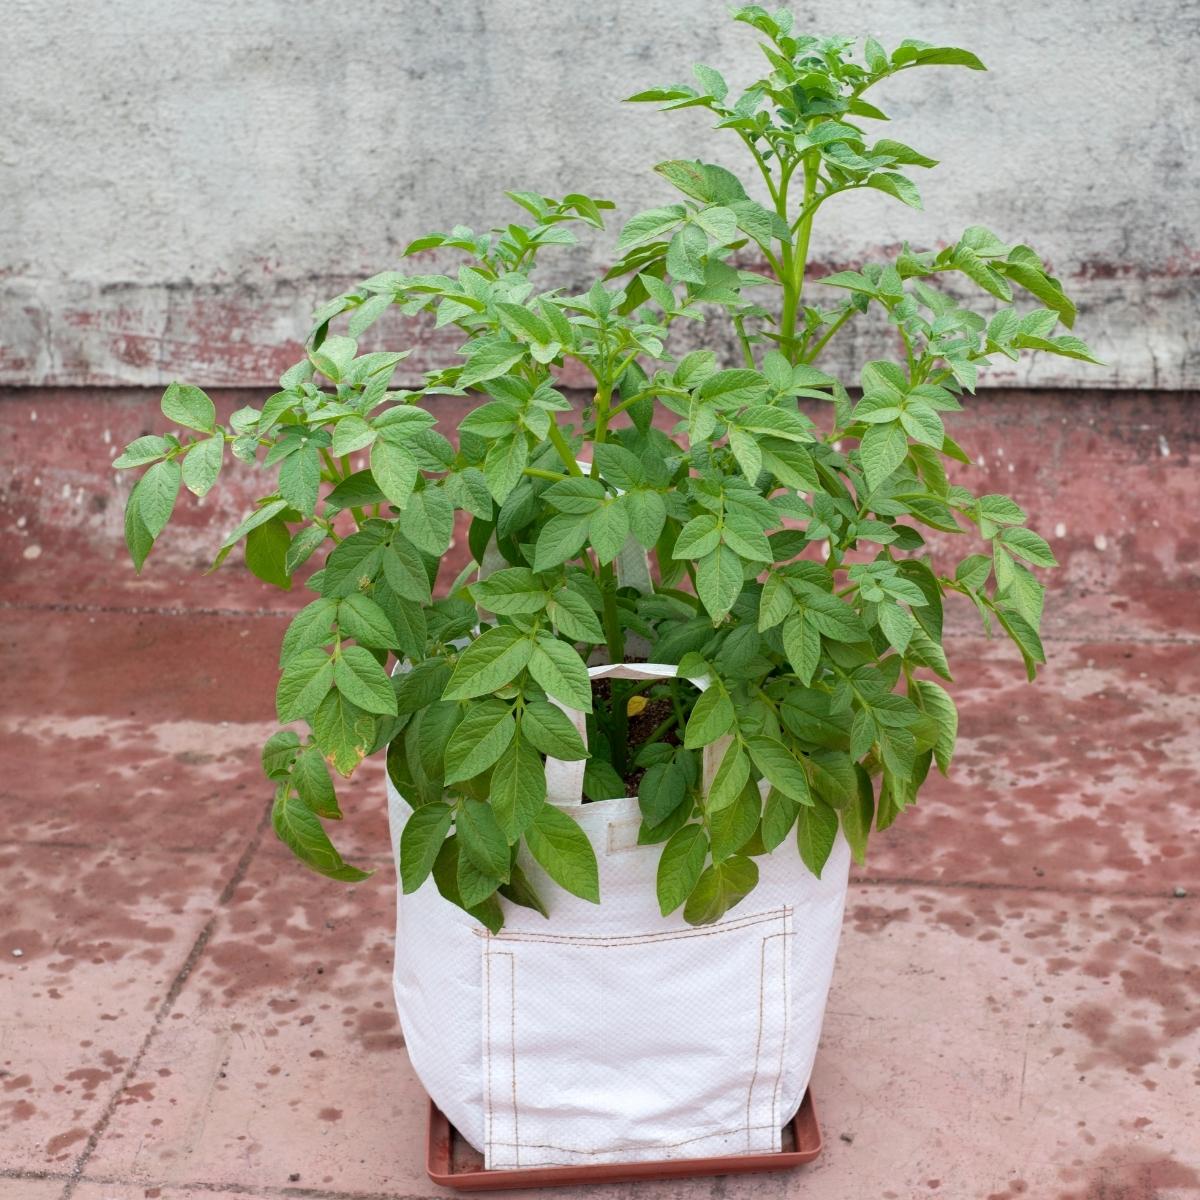 https://growhappierplants.com/wp-content/uploads/2022/10/pros-and-cons-of-grow-bags-featured-image.jpeg